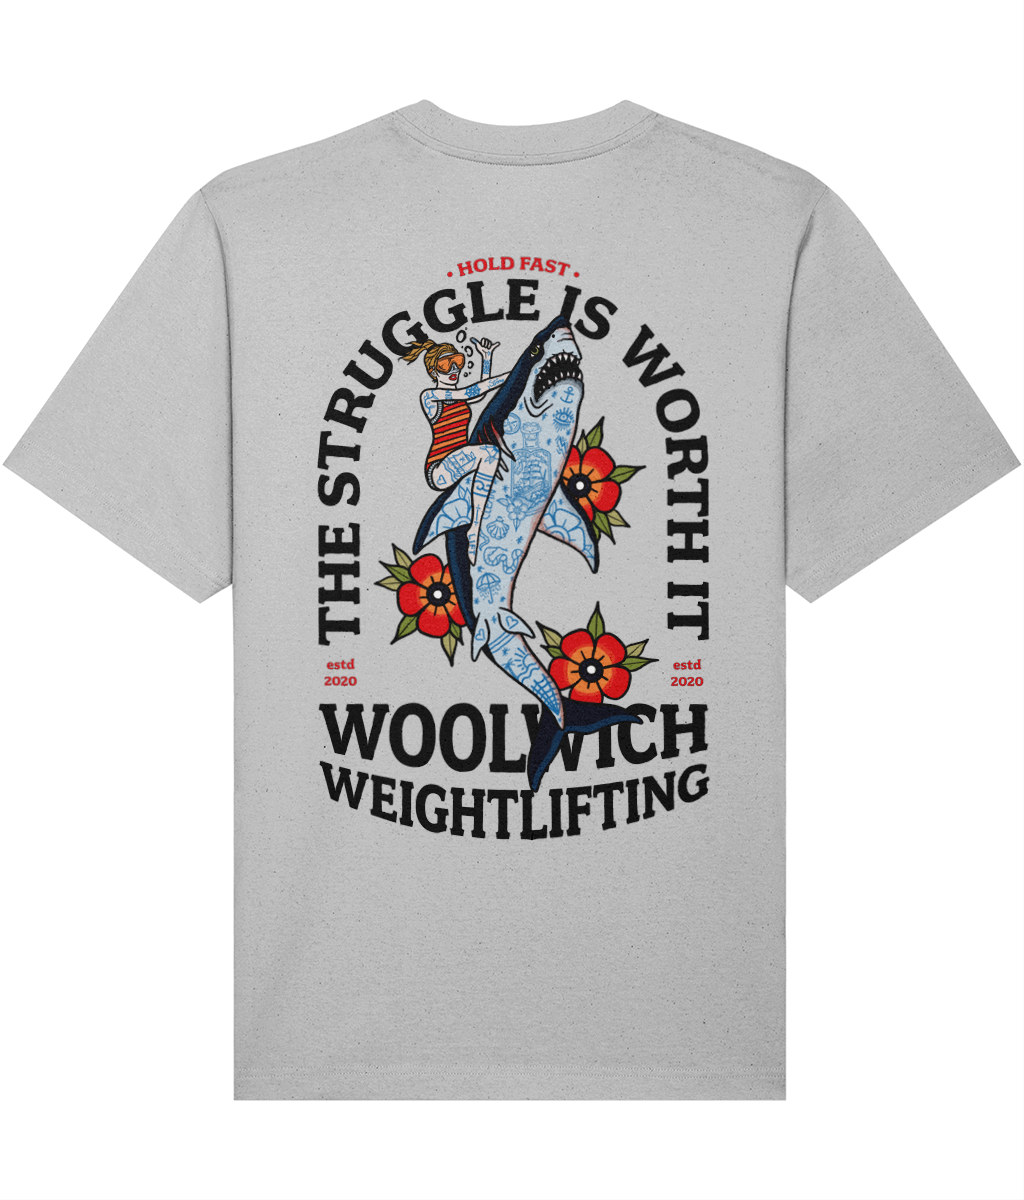 The Struggle oversized t-shirt - Woolwich Weightlifting